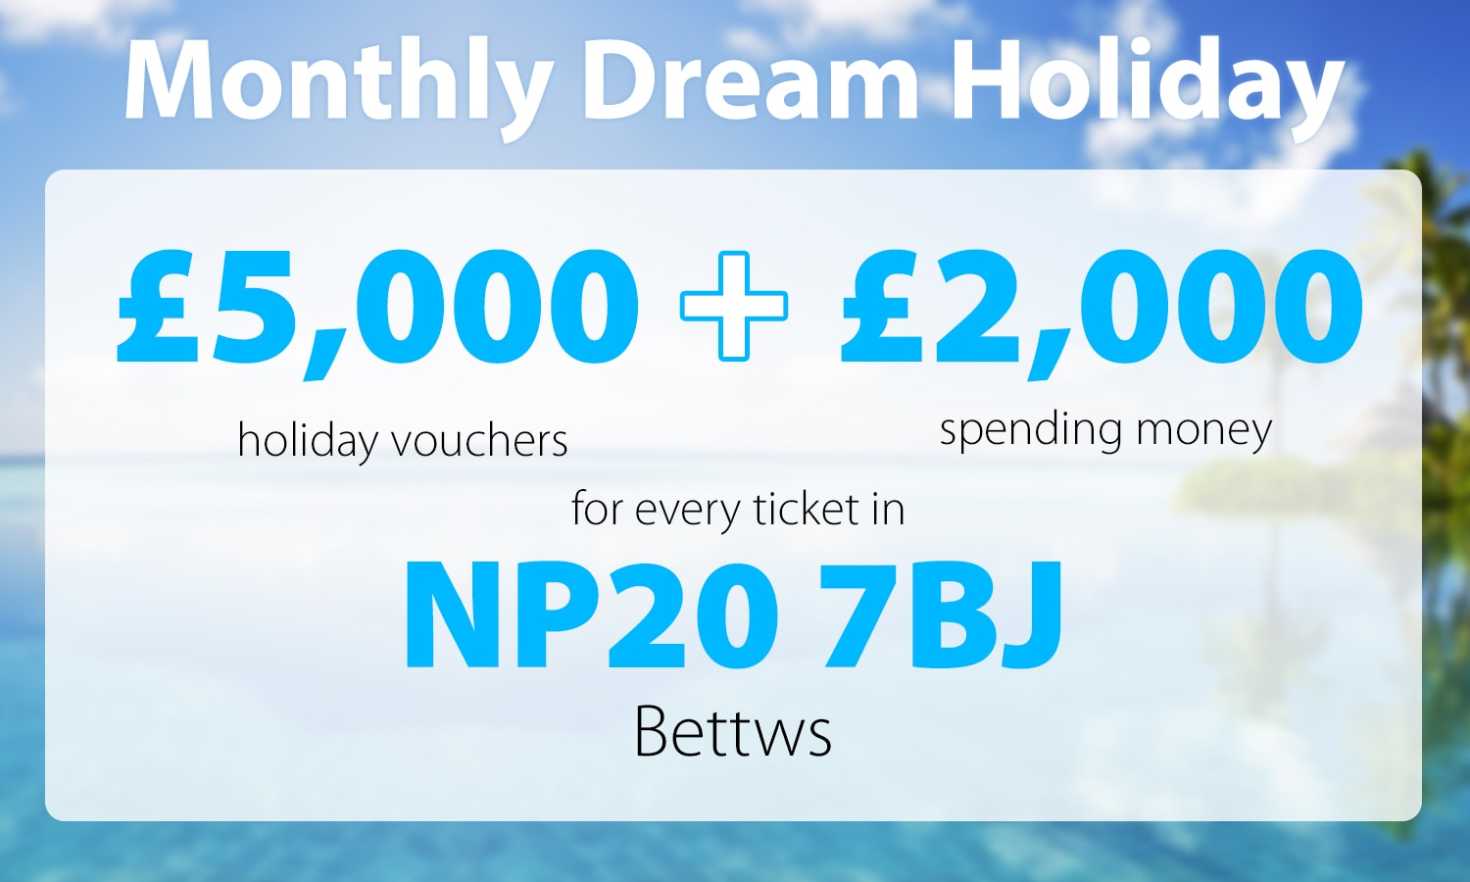 One lucky player in Bettws will have exciting travel plans after winning July's Dream Holiday prize